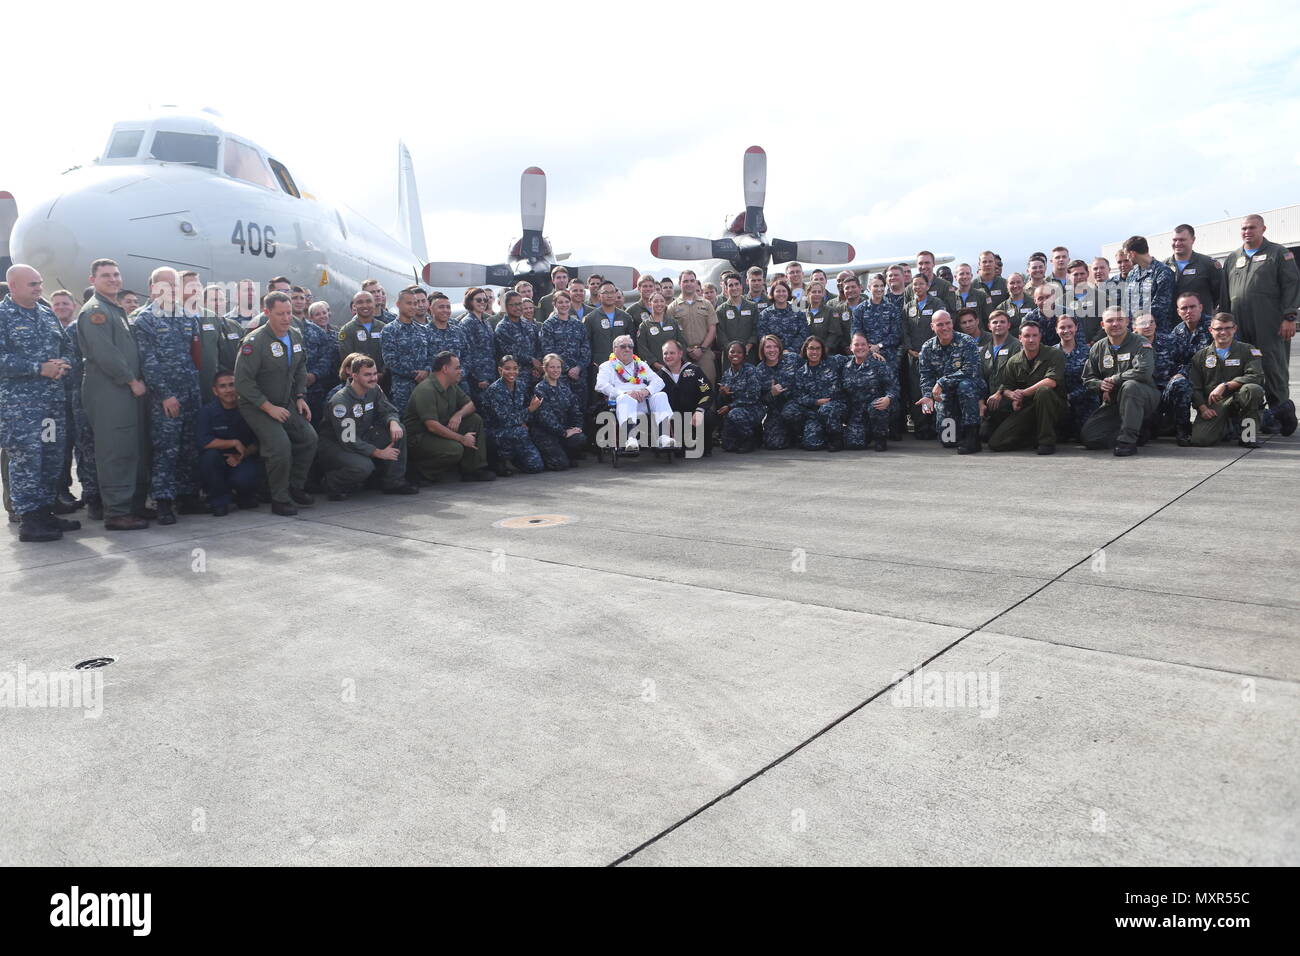 Melvin Heckman, a Pearl Harbor survivor, poses for a photo with the sailors of Patrol Squadron 9 next to a P-3C Orion aboard Marine Corps Base Hawaii, December 2, 2016. Heckman is known for rescuing sailors from the USS Arizona during the attack on Pearl Harbor after the ship was attacked by Japanese Zeros. 'I reached out to grab a man's hand to help him up and take him to the island,' said Heckman, a Sheridan, Wyoming, native. 'I got him out of the water and saw that everything below his belly button was missing; he died in my arms'  Heckman was awarded a purple heart for his bravery after re Stock Photo